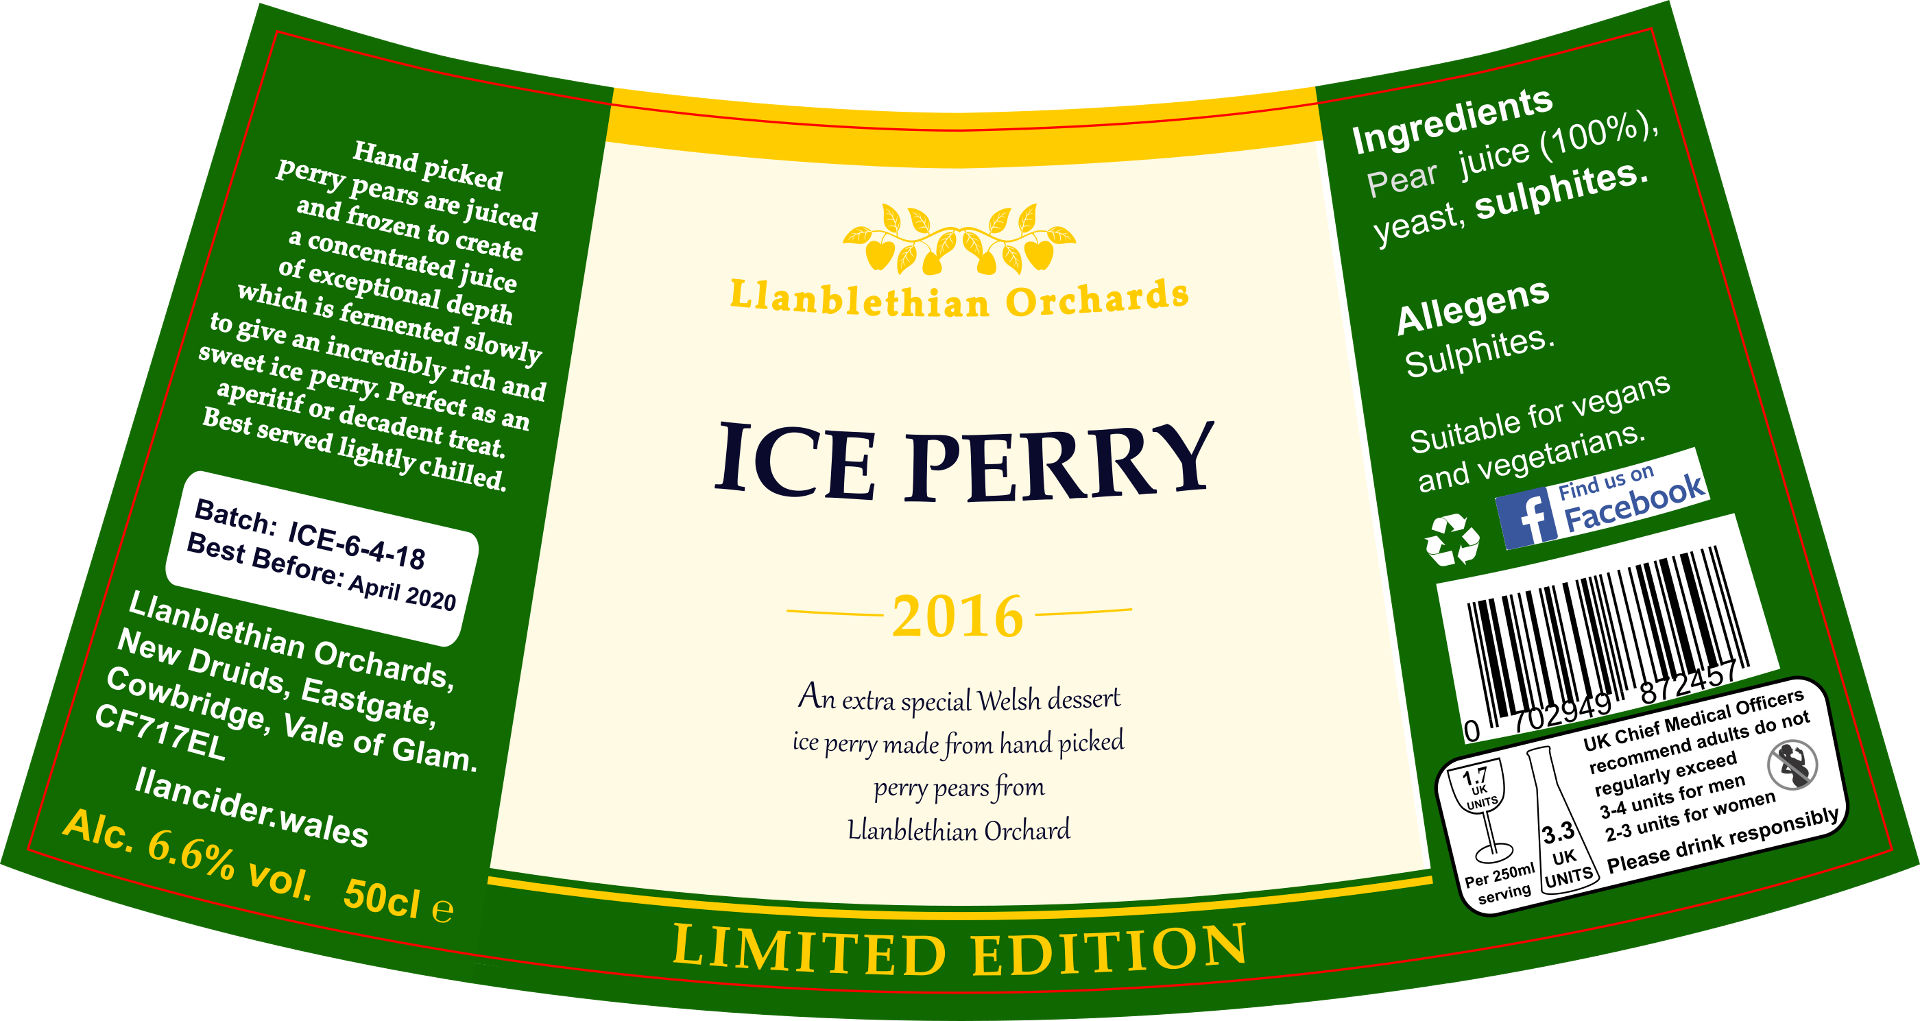 Llanblethian orchards ice perry label south wales